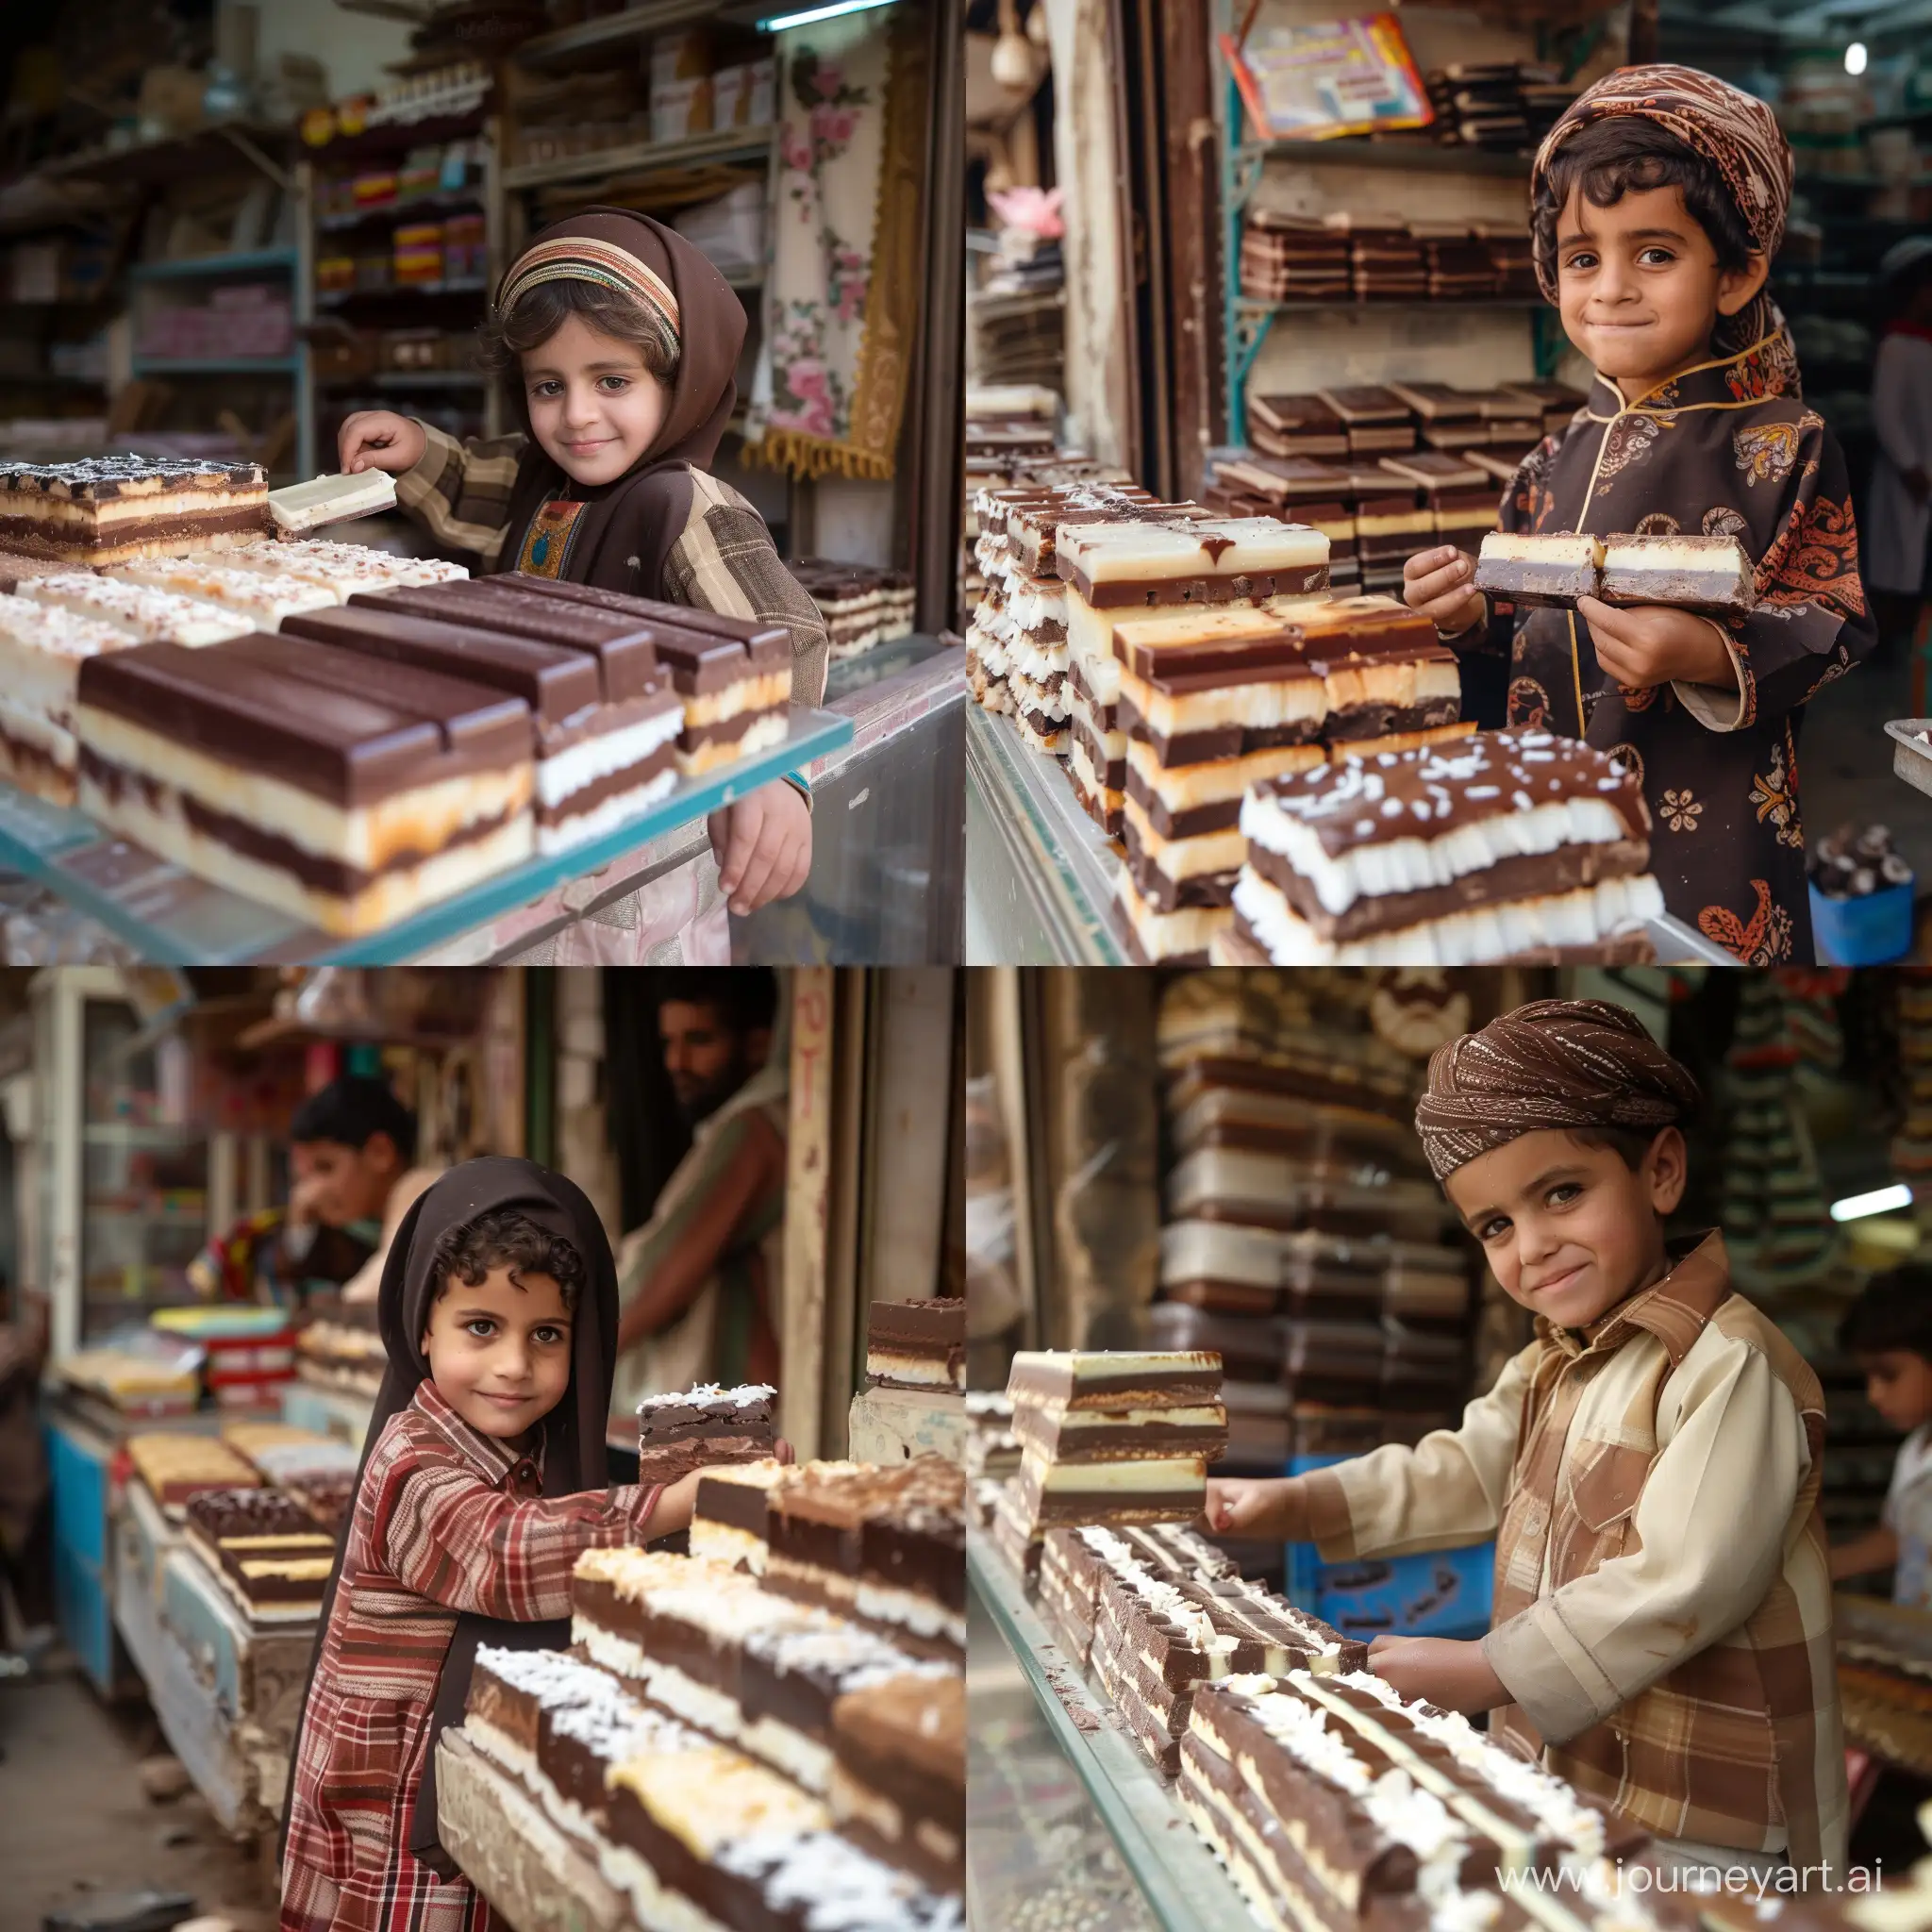 Adorable-Yemeni-Child-in-Traditional-Attire-Sneaks-CoconutChocolate-Delight-from-Sweet-Shop